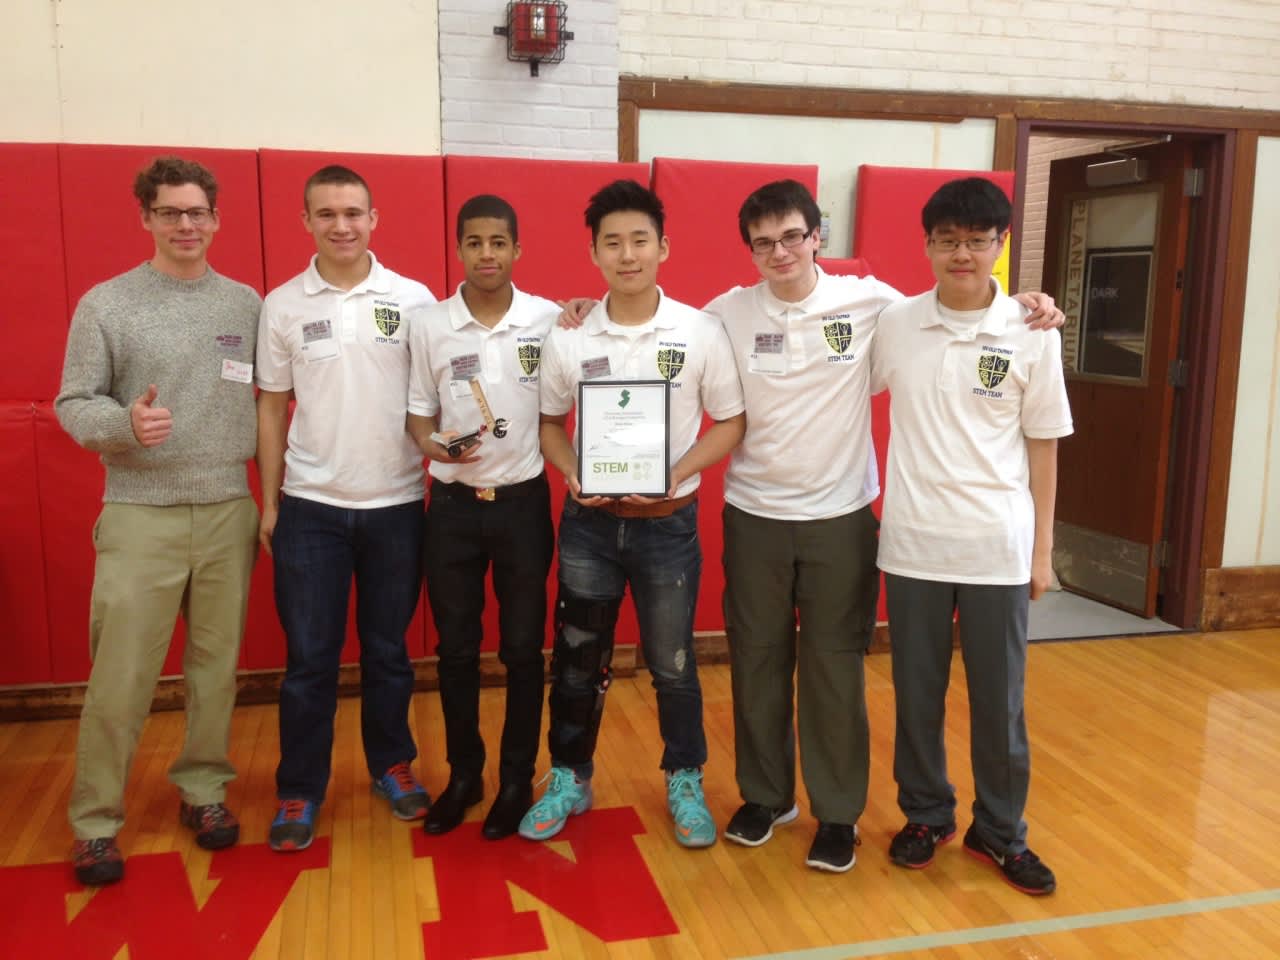 Pictured left to right: Mr. Maietta, Brandon Policastro, Basil Tweedy, Aiden Choi, Brent Cagen, and Steve Lee.